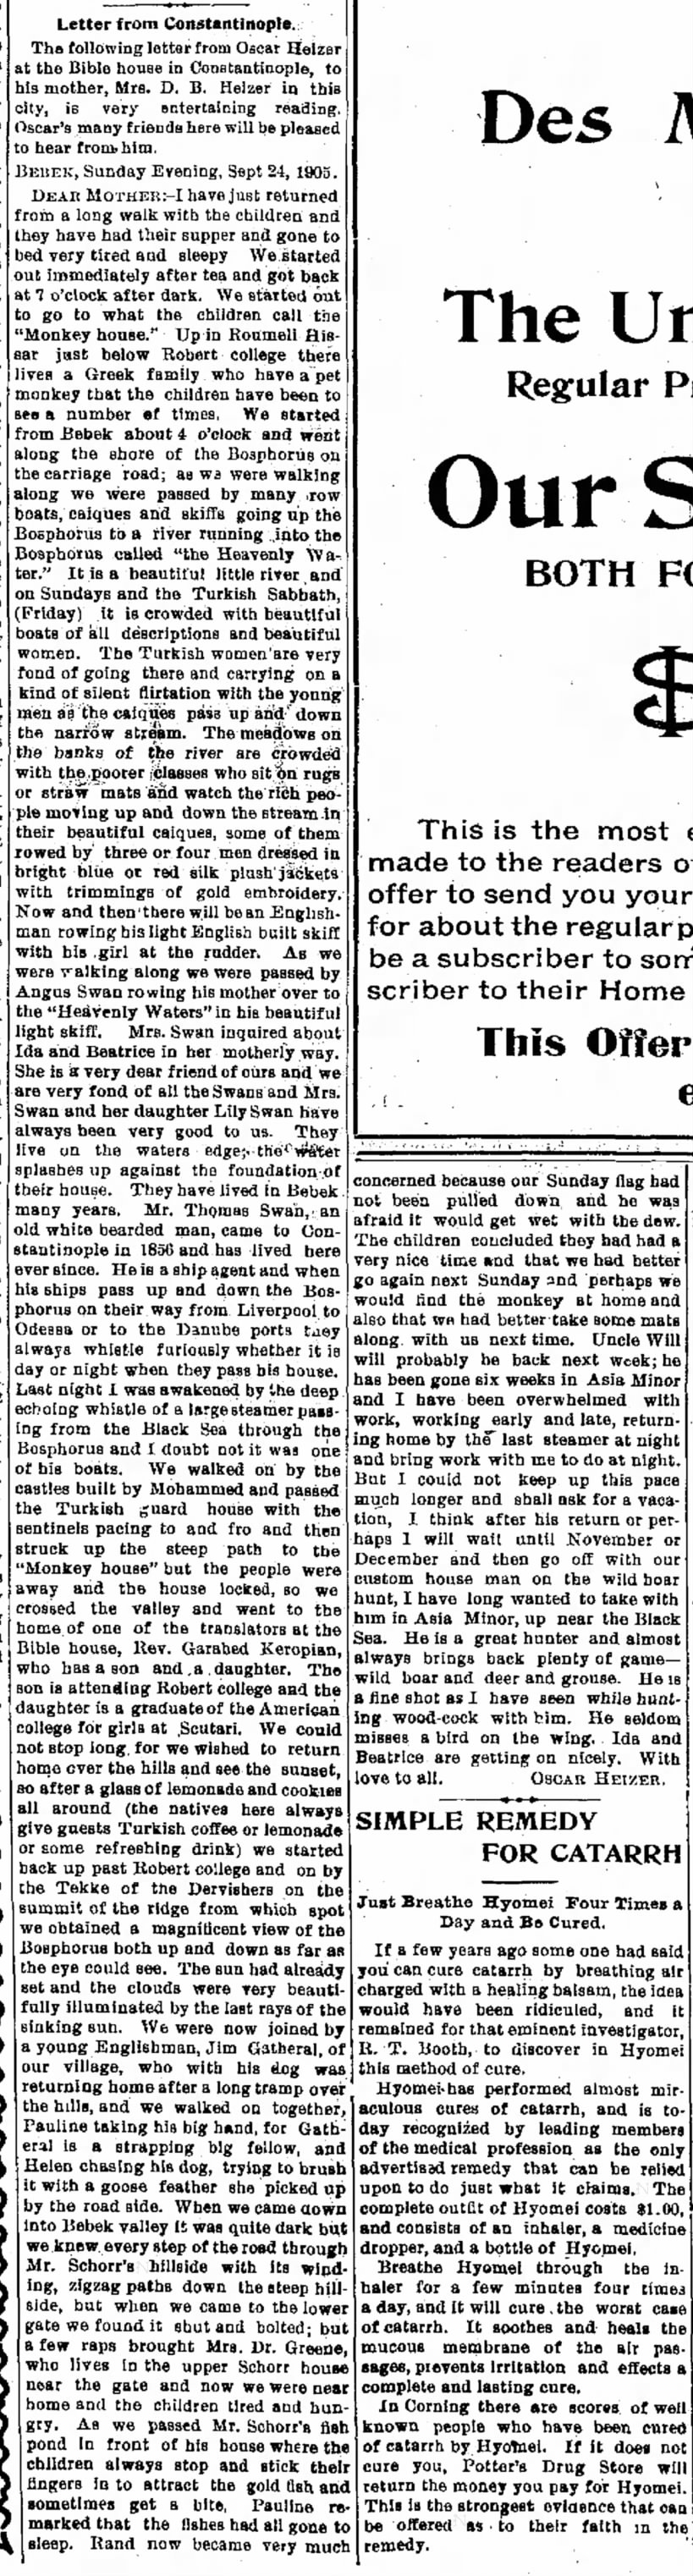 Article about Oscar Heizer Adams County Free Press Oct 18 1905